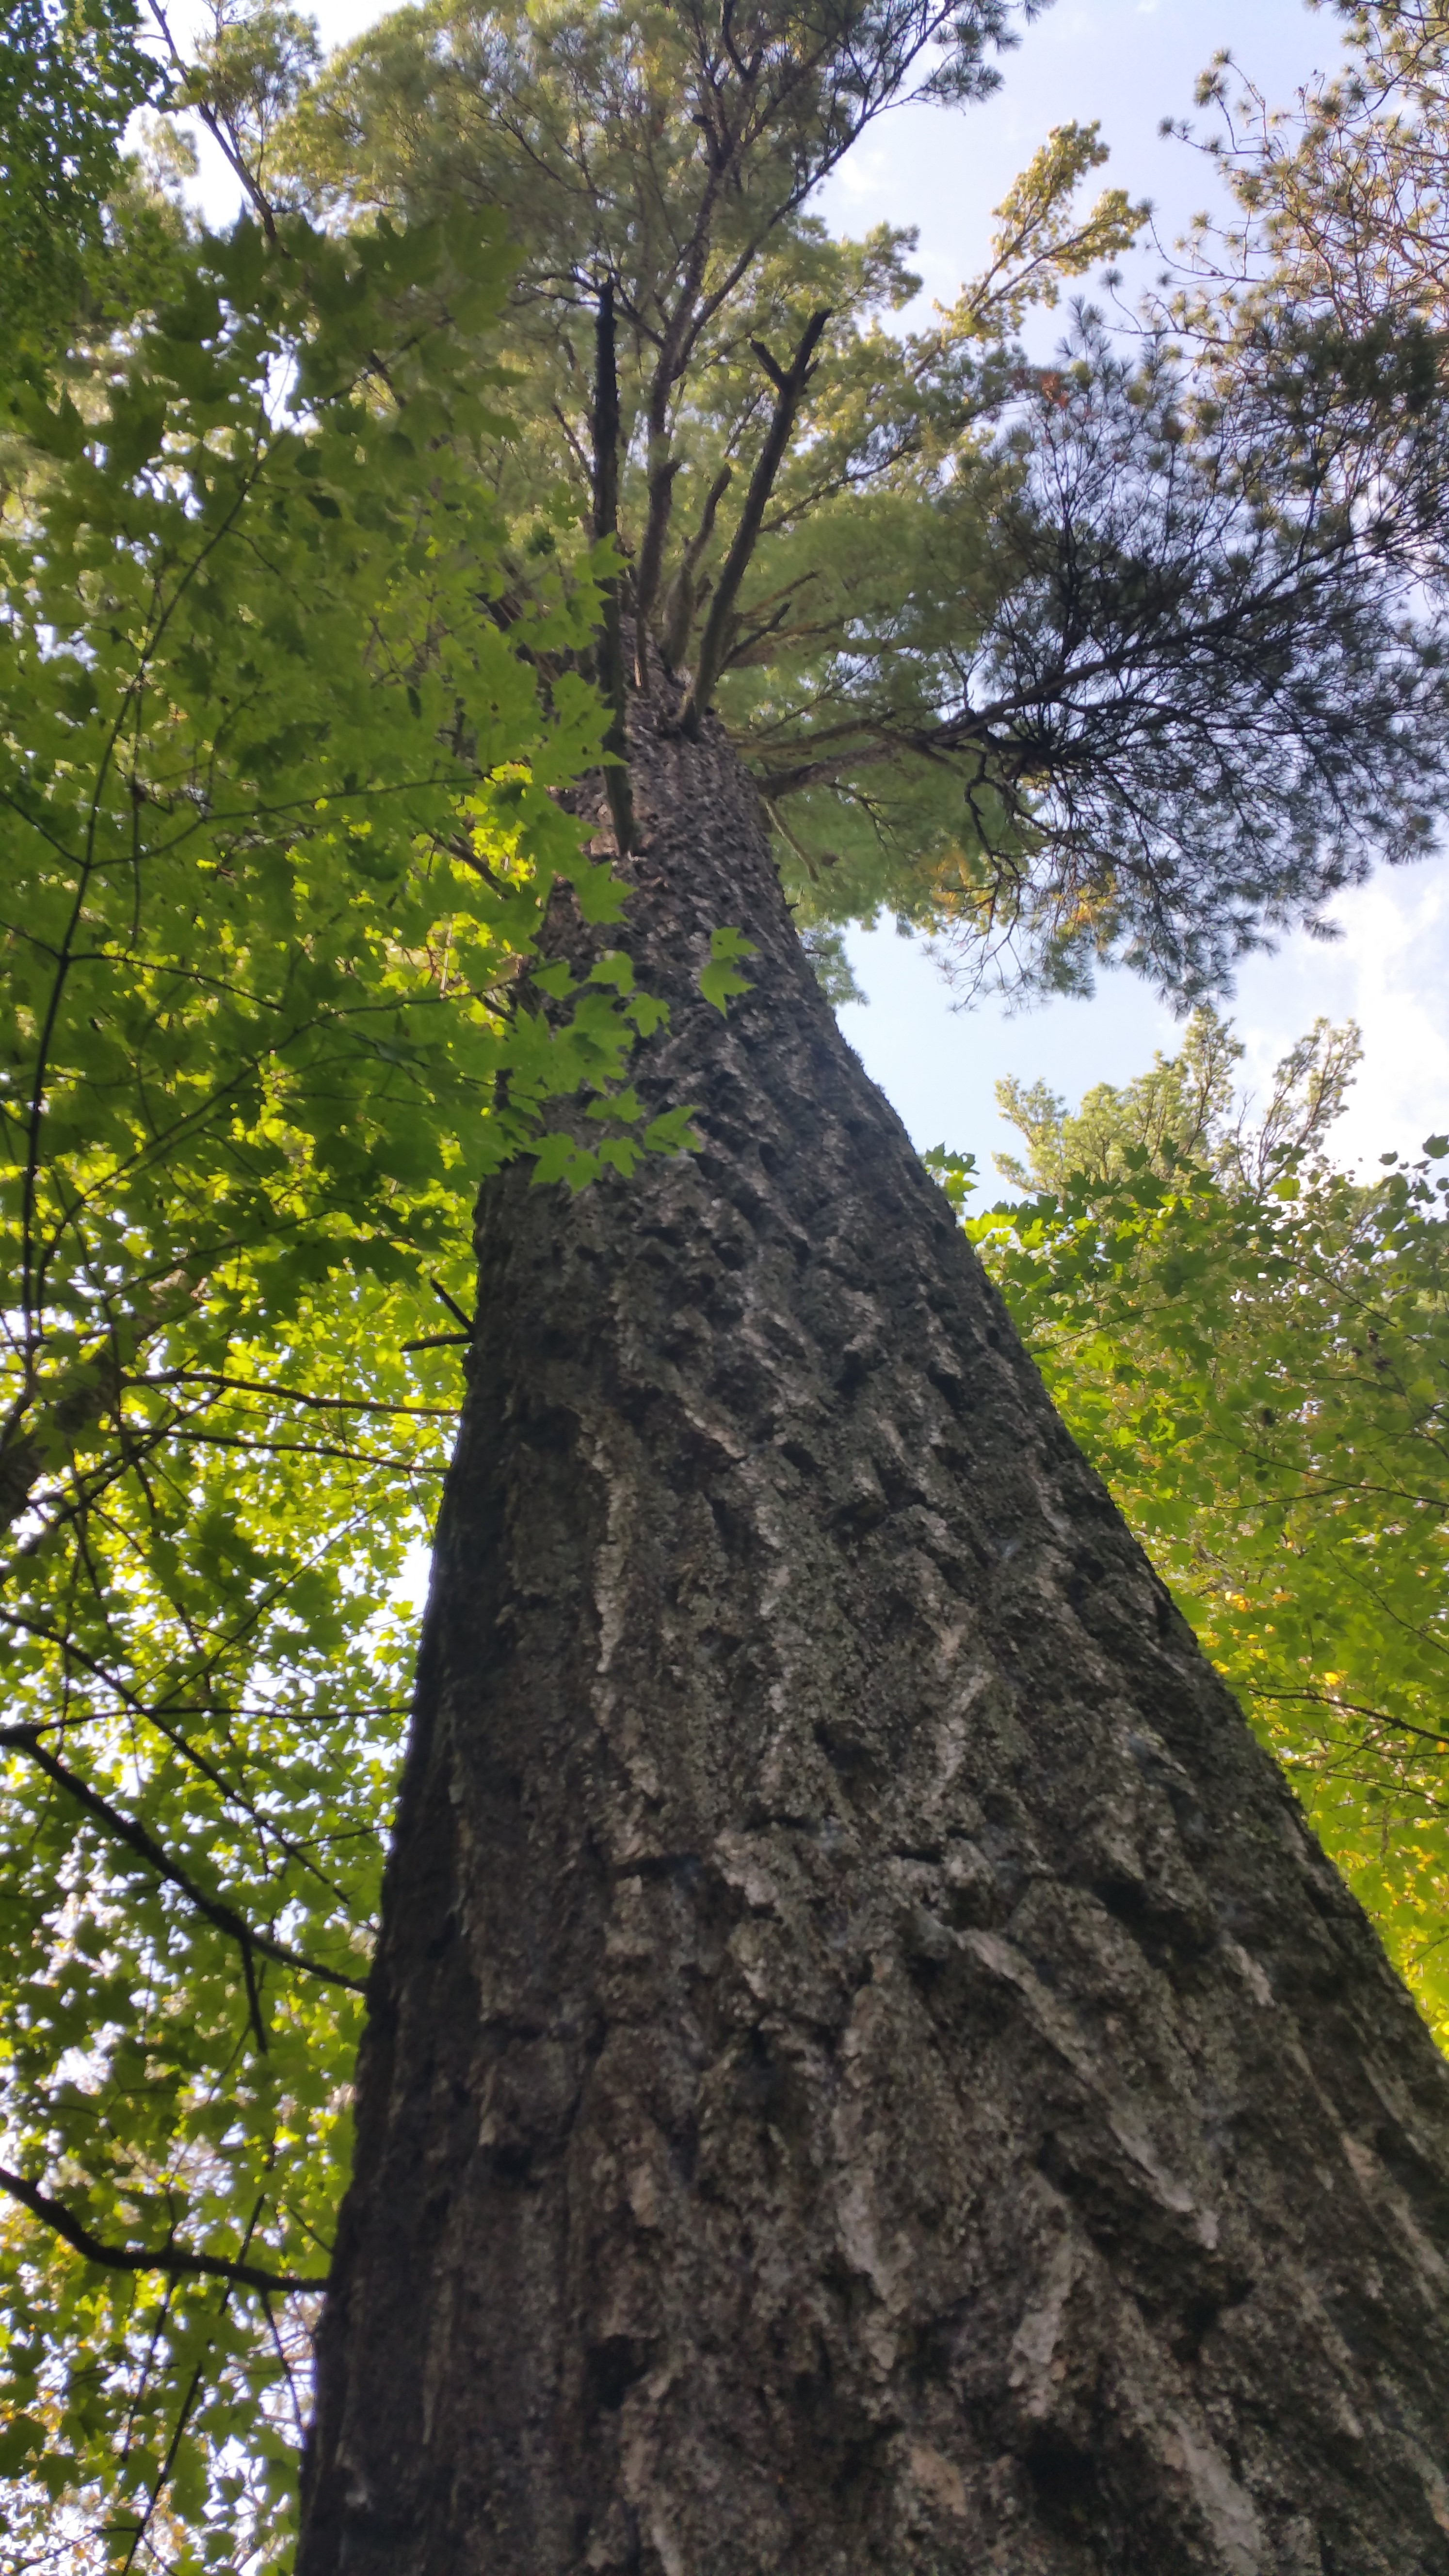 Looking up the trunk of an evergreen tree.